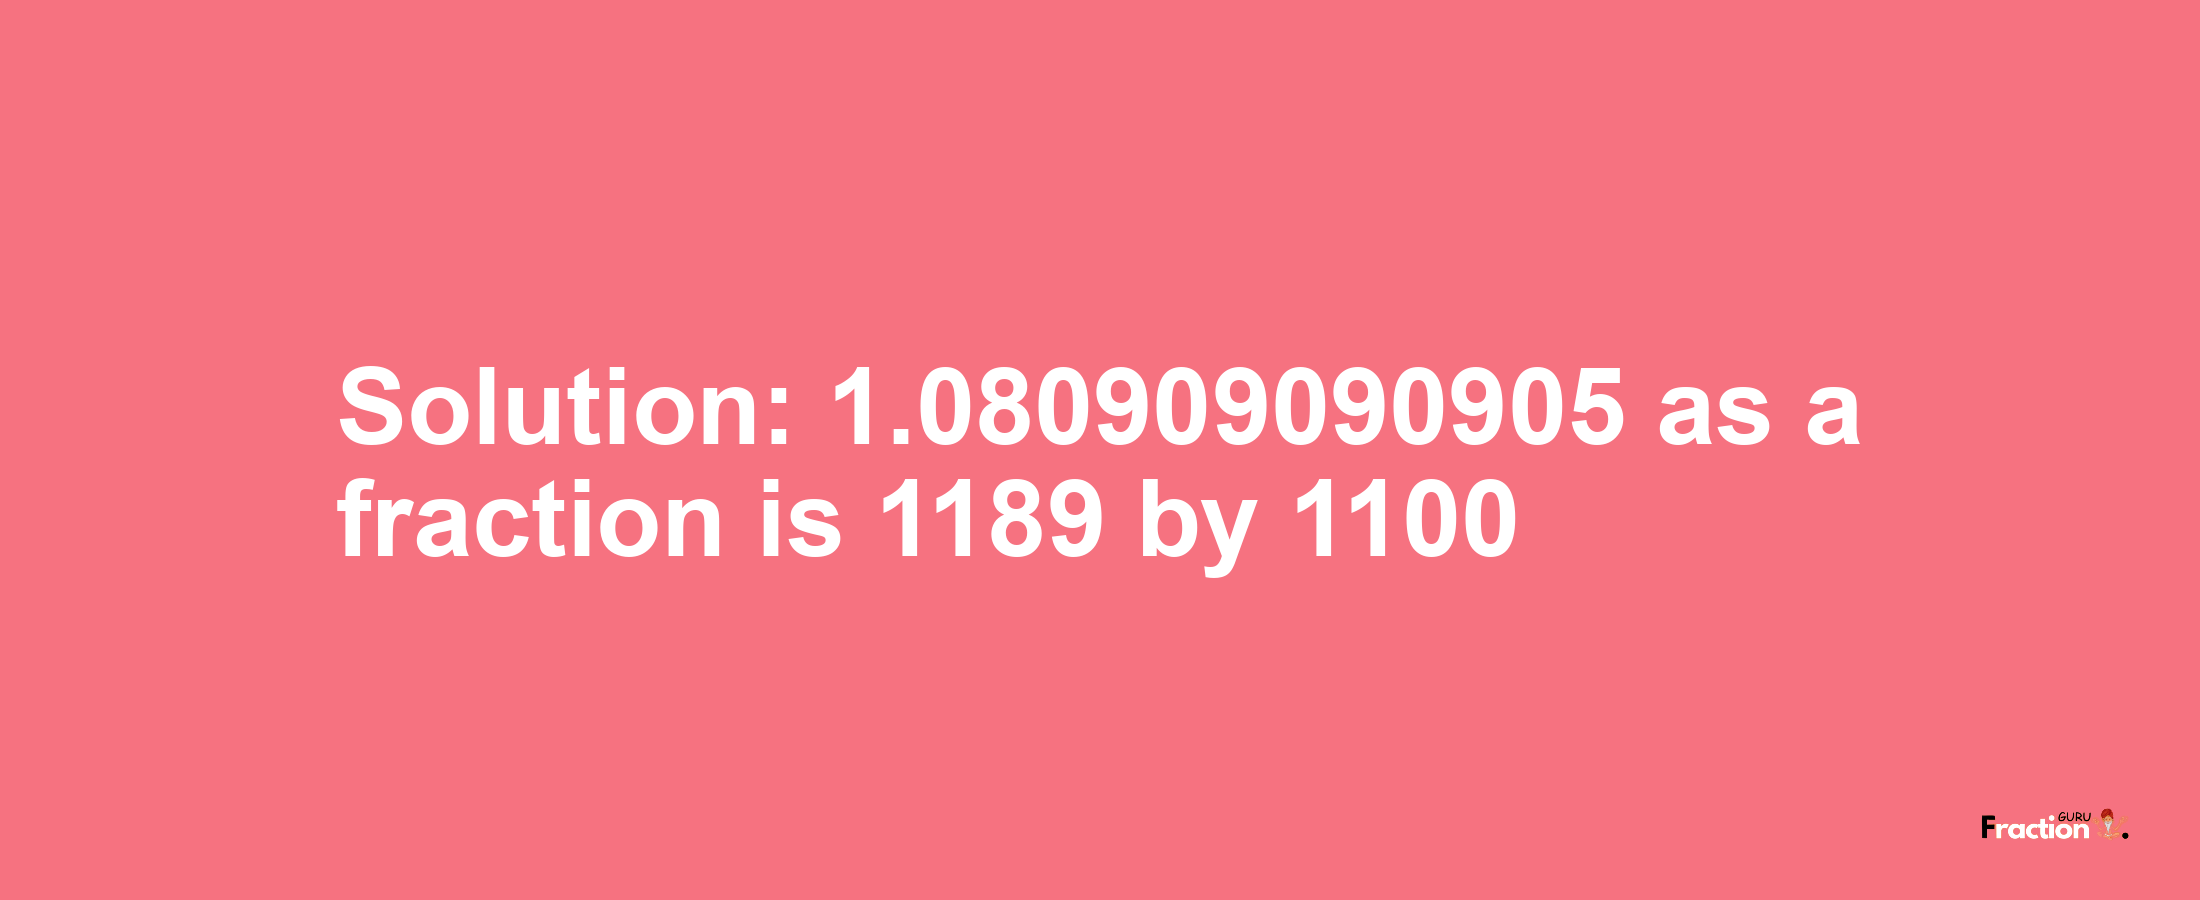 Solution:1.080909090905 as a fraction is 1189/1100